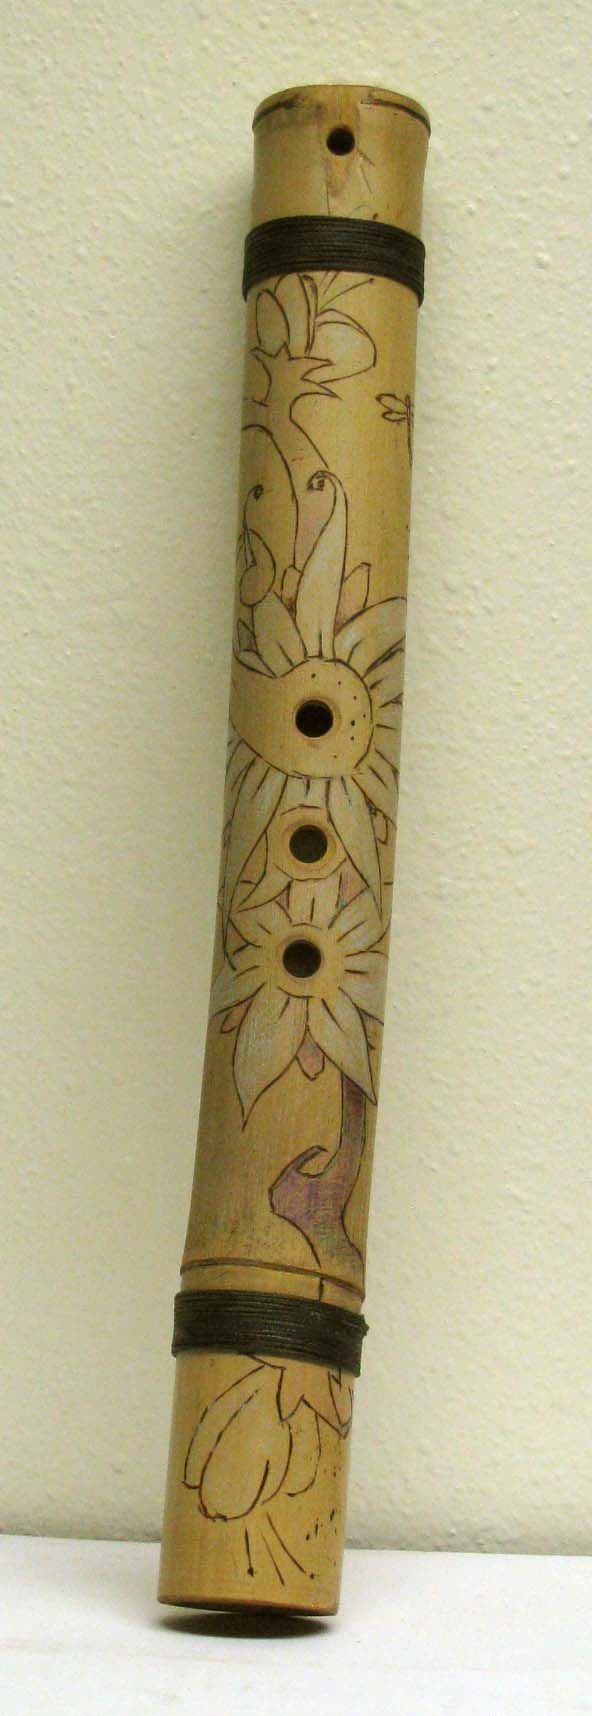 Played with the left nostril, and left hand covering the three holes. Often called the love flute since the breath from the nose could not tell lies. Decorated with wood burn designs for $35.00